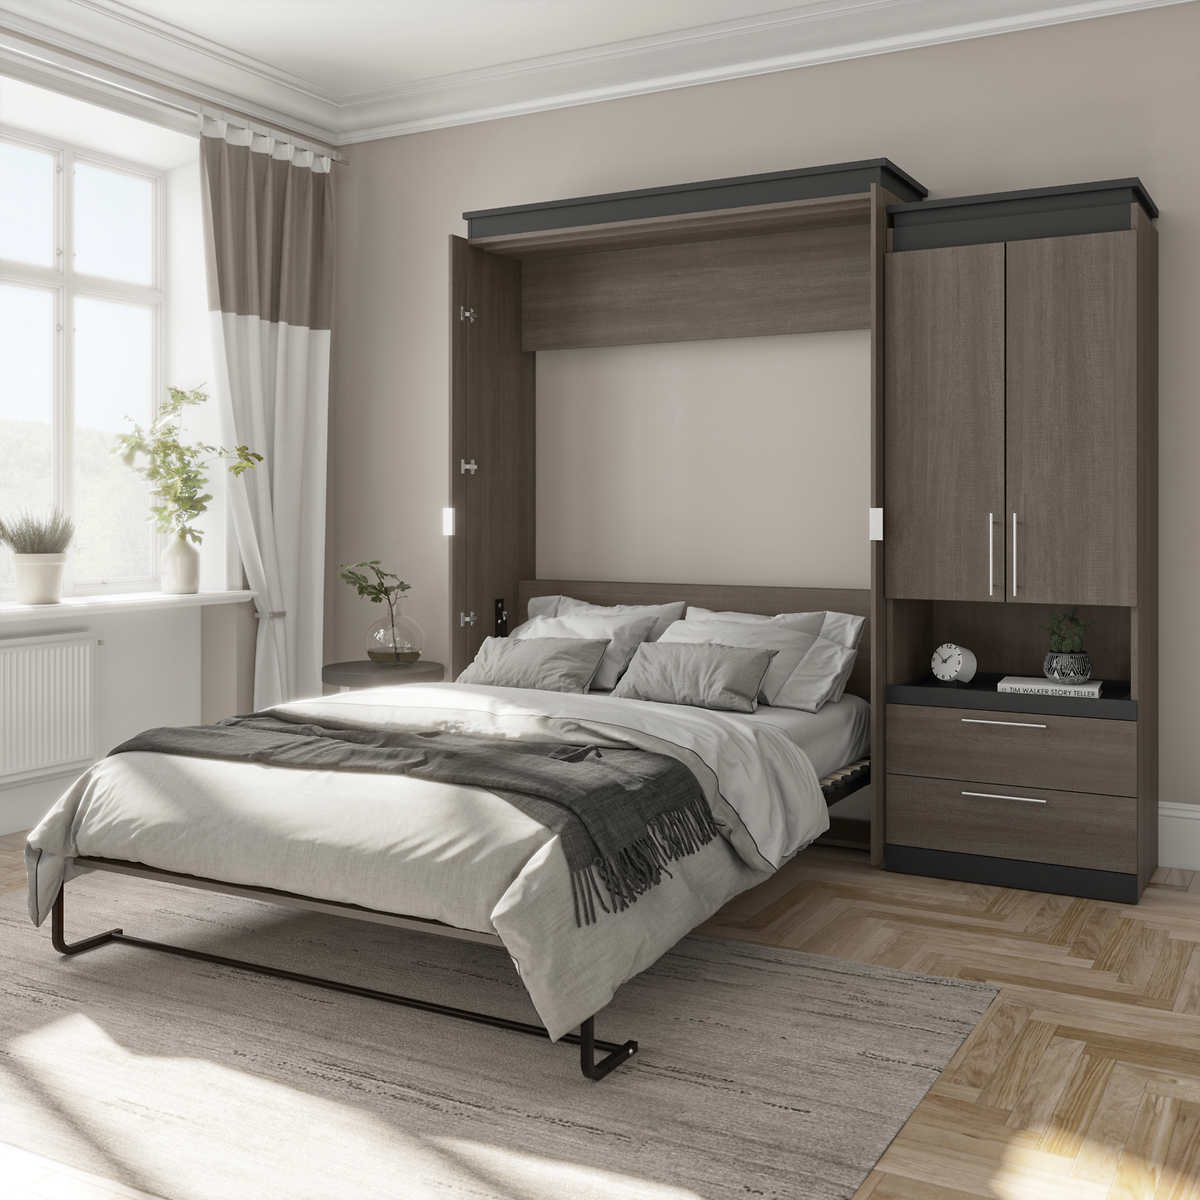 Orion Queen Wall Bed With Storage, Nightstand With Shelves Above